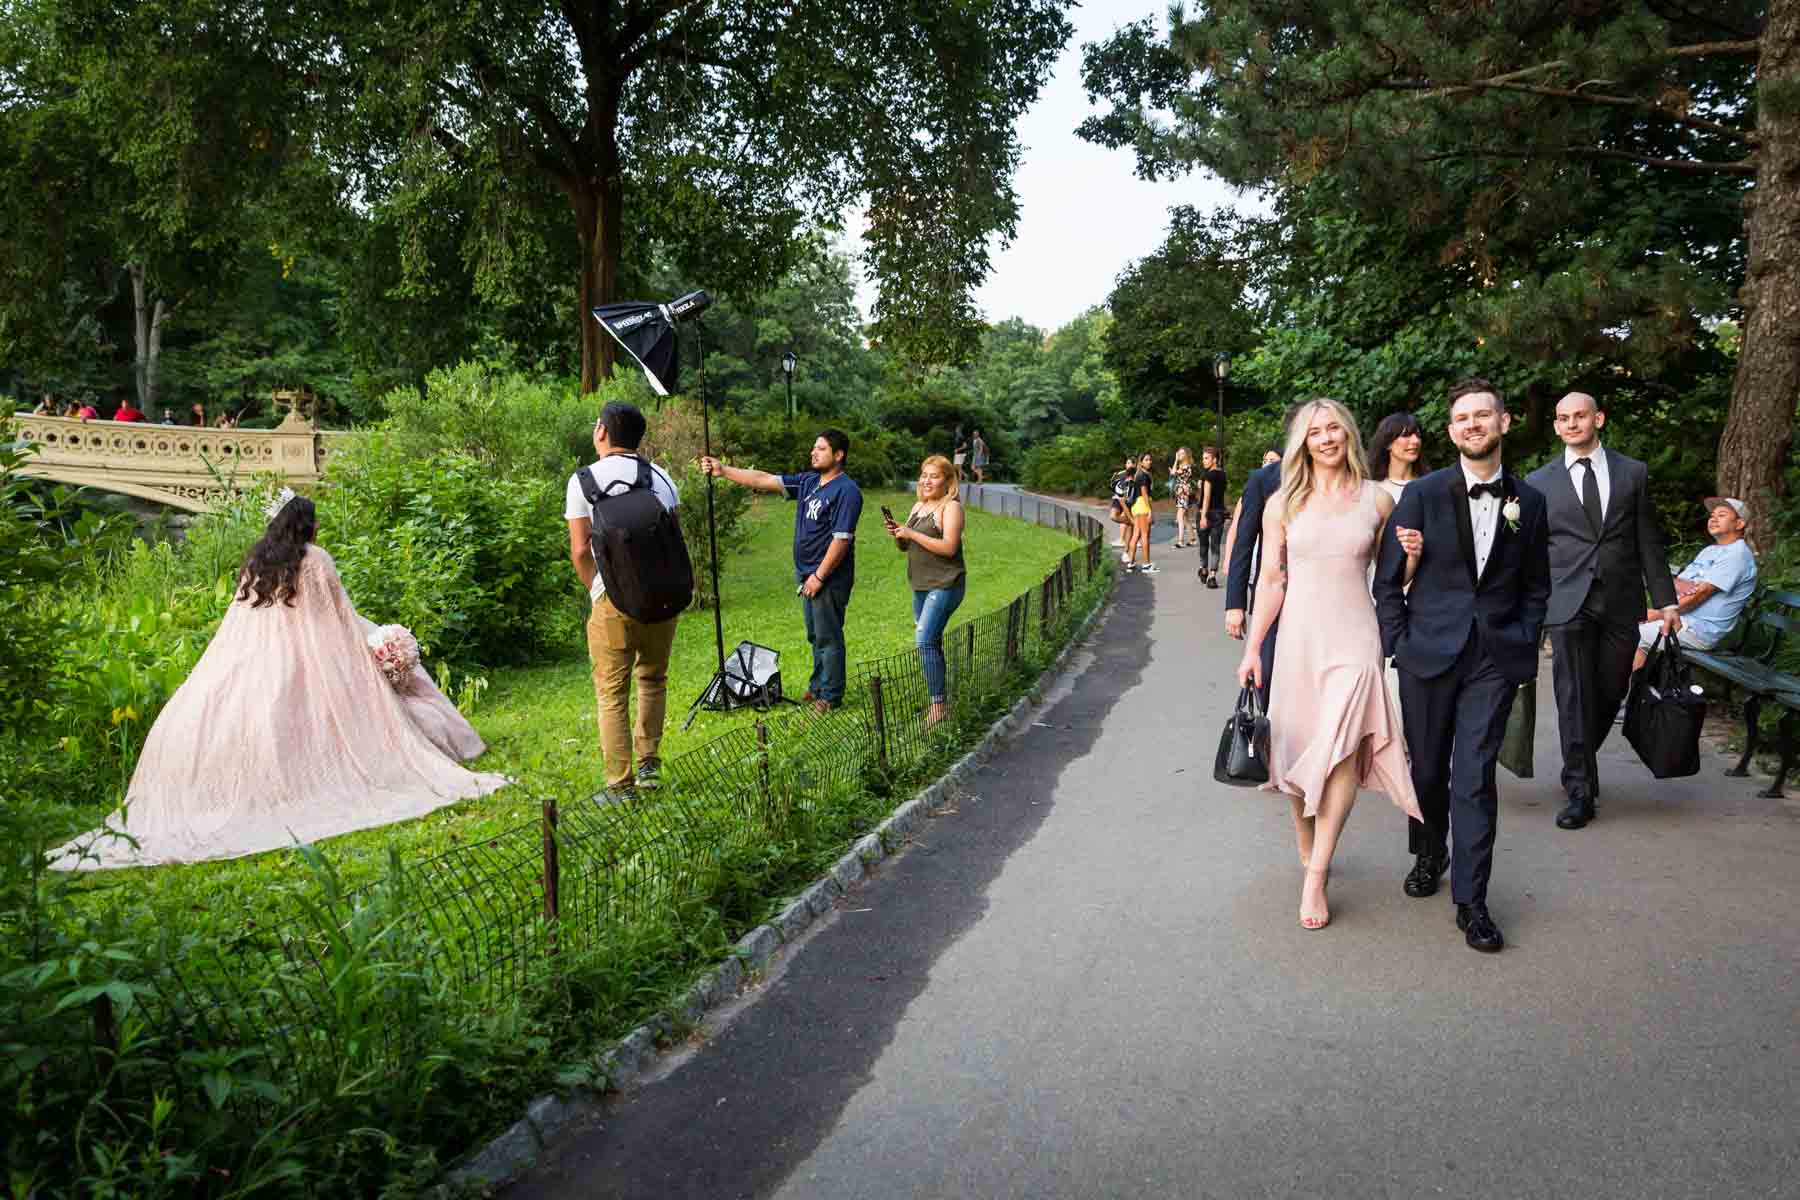 Wedding party walking past photo shoot for an article entitled, ‘Do you need a permit to get married in Central Park?’